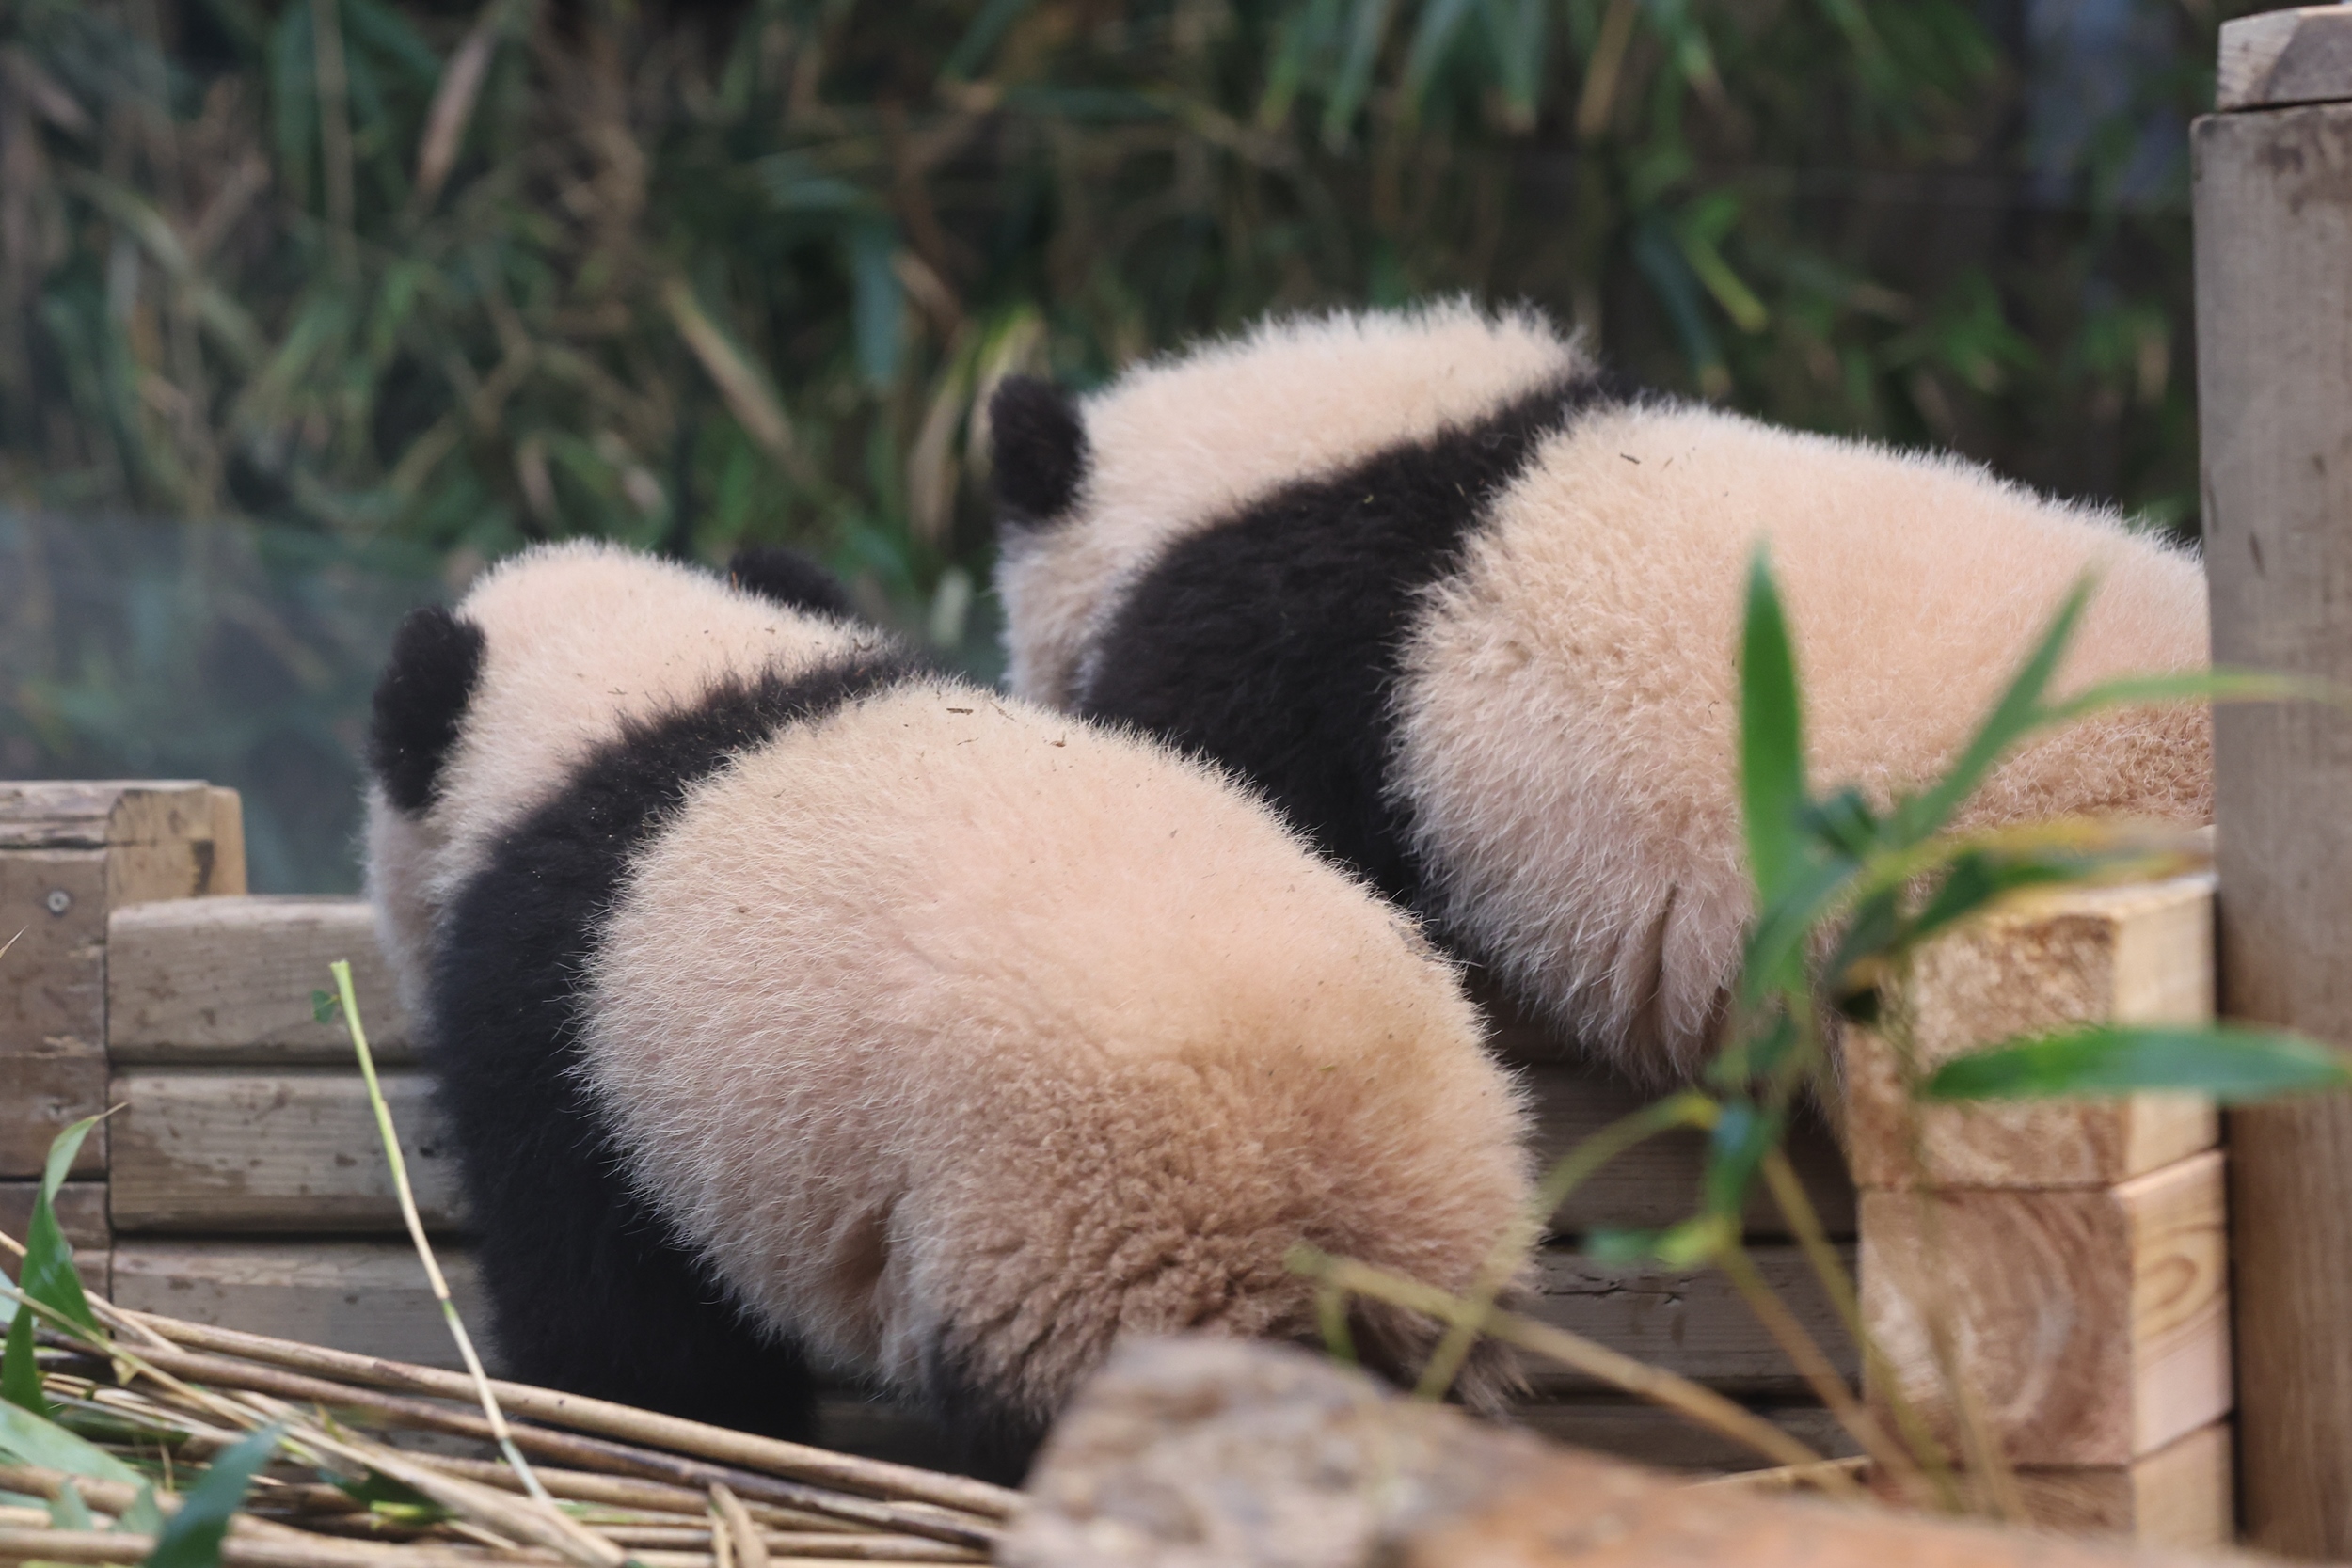 Though born pink and bristly, Hui Bao and Lui Bao have already grown a thick fur with the typical black and white markings.